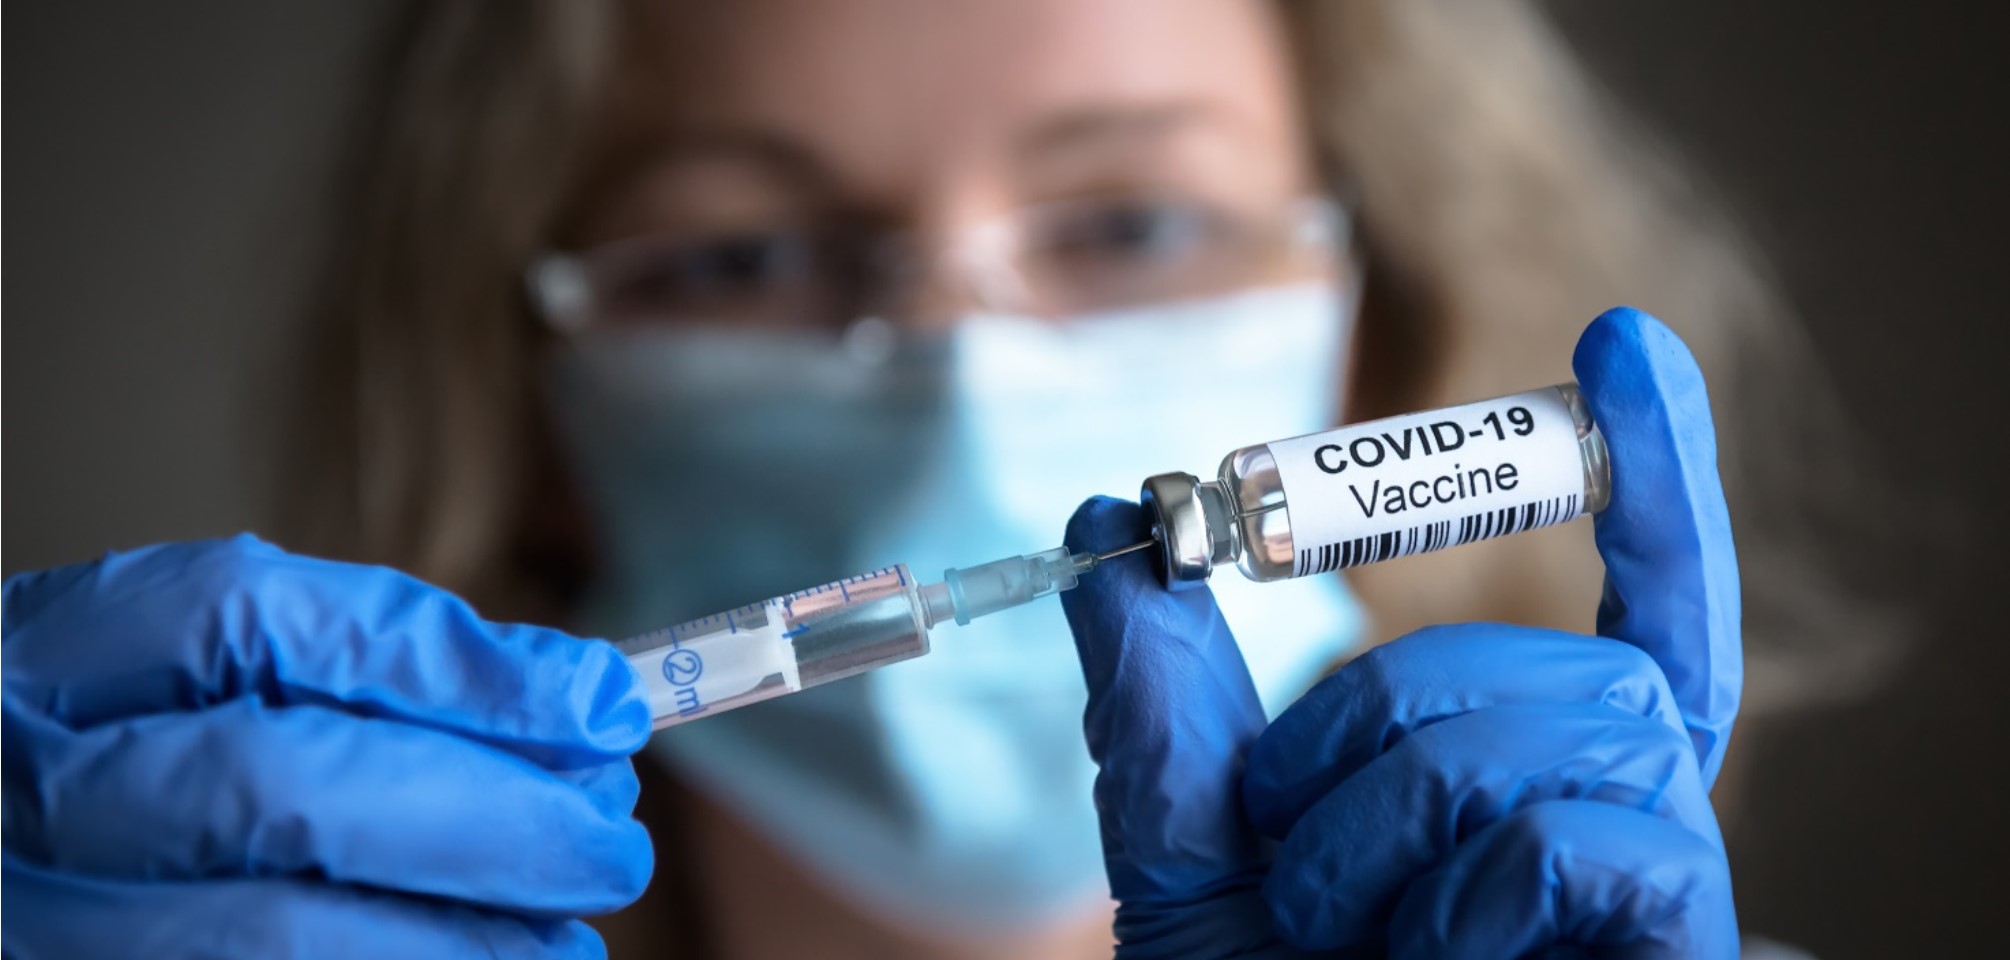 close up of a woman wearing surgical gloves and holding a vial of COVID19 vaccine